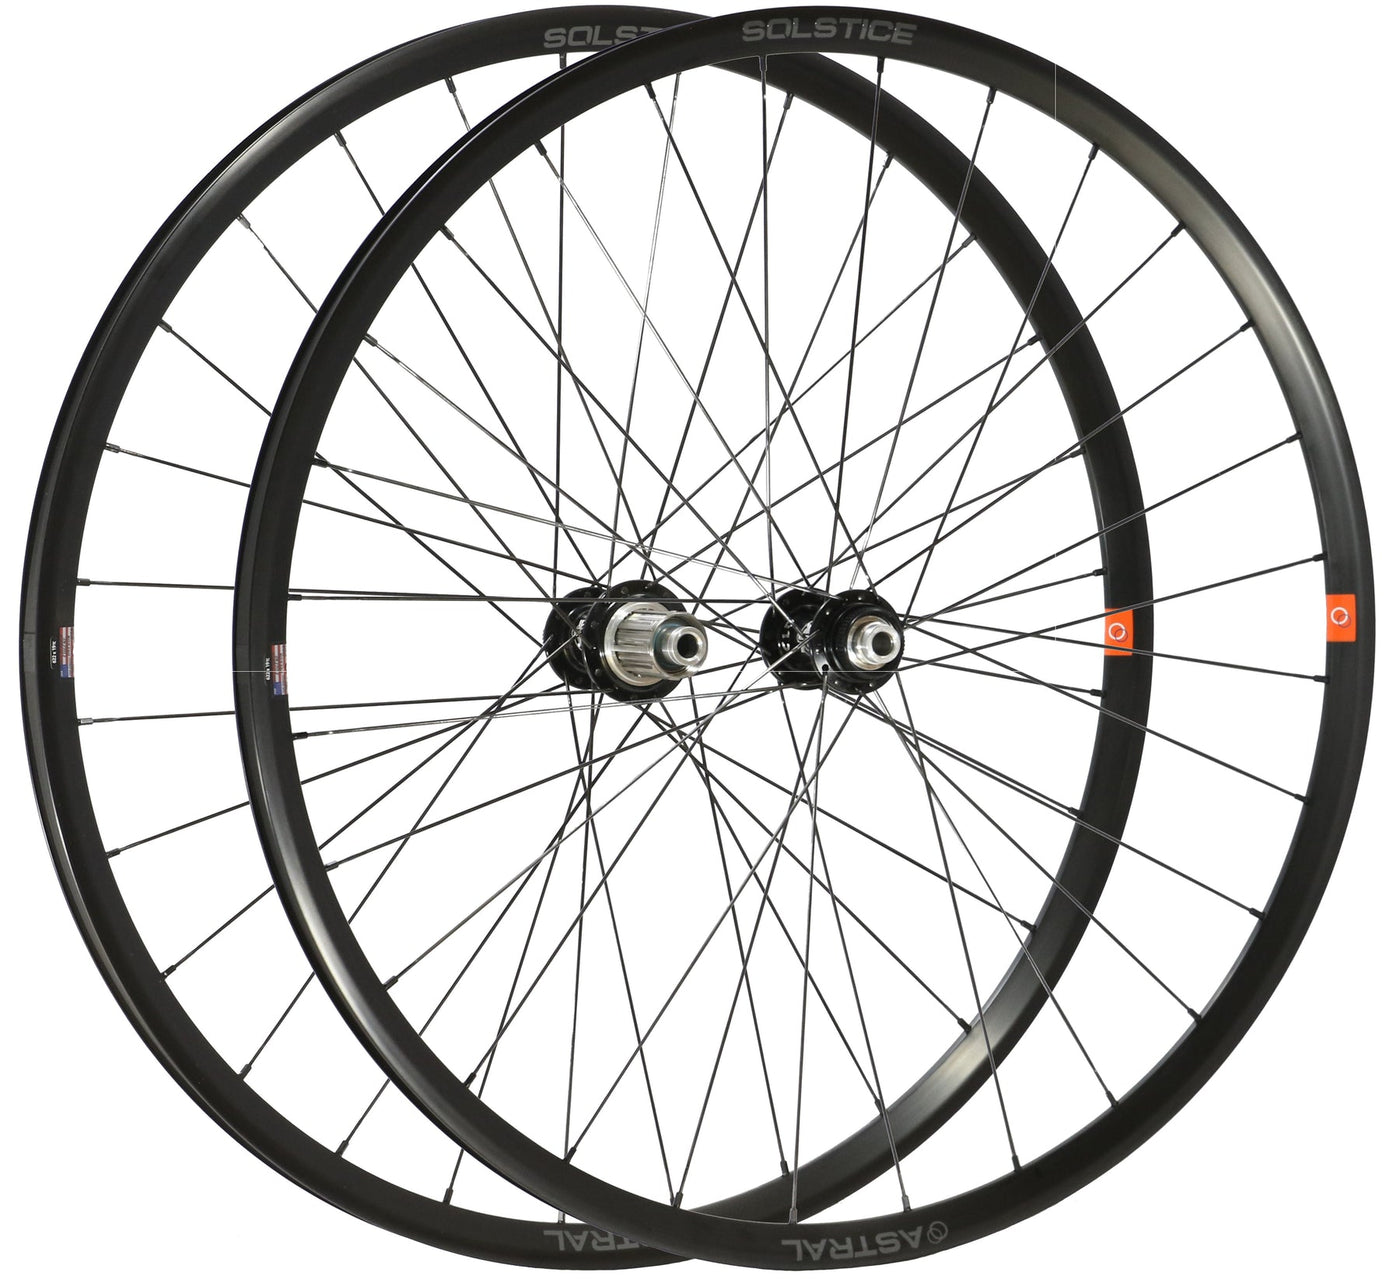 Astral Solstice Alloy Disc Rims to Astral Approach CL Hubs